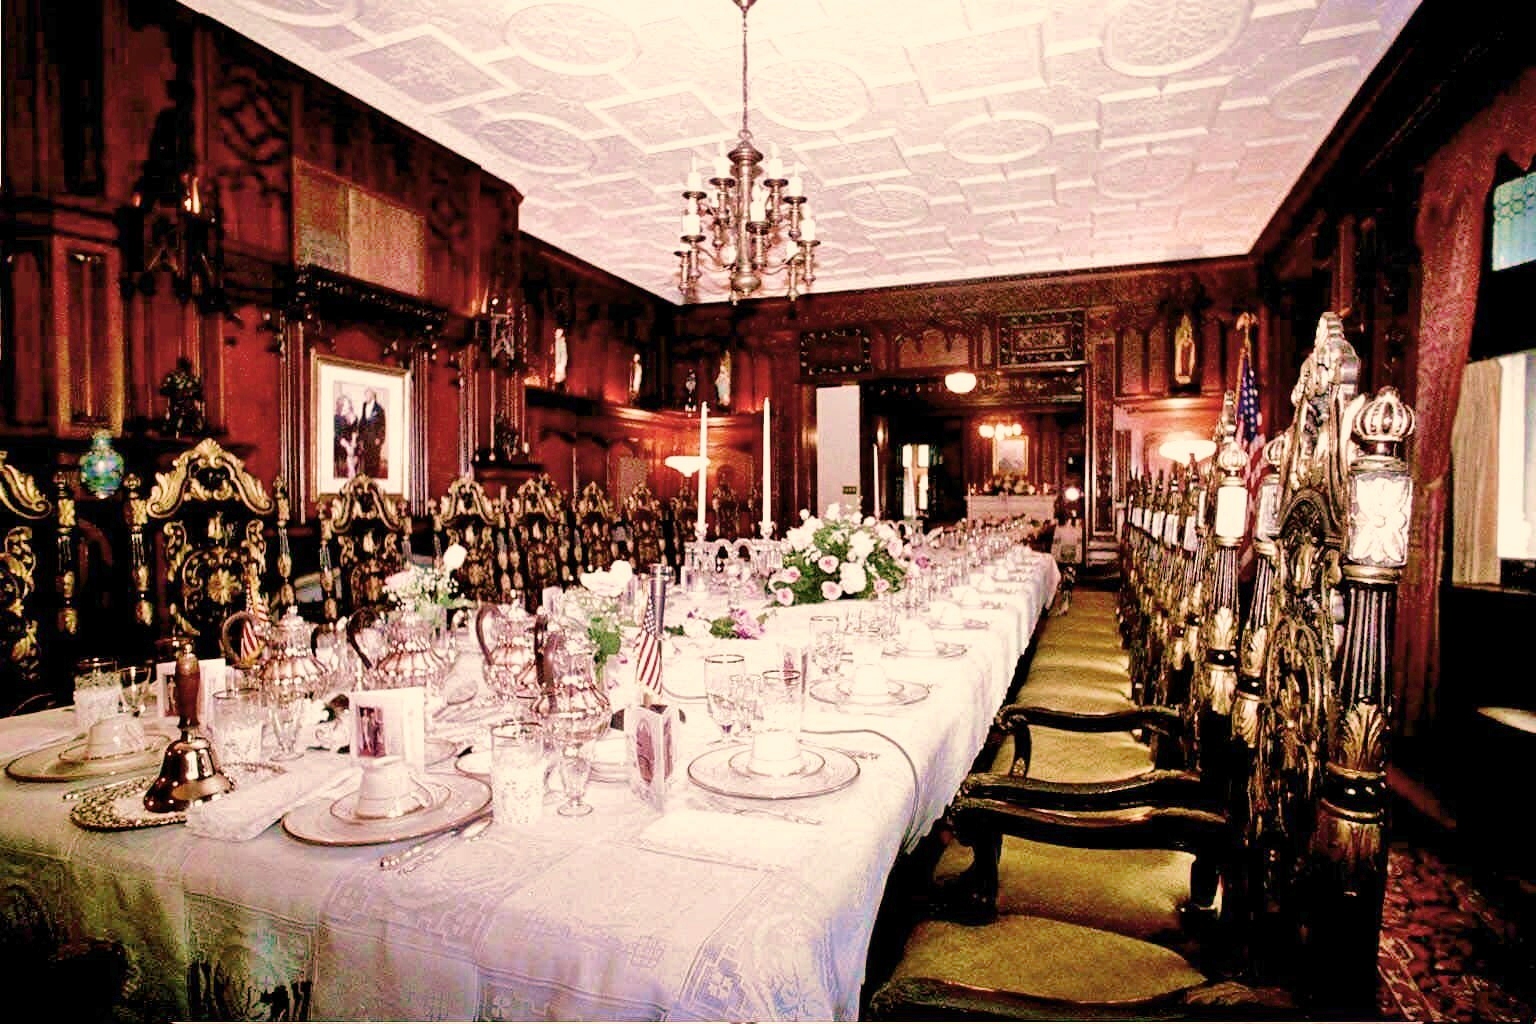 The Chapel Dining Room of The House of the Lord, Woodmont.